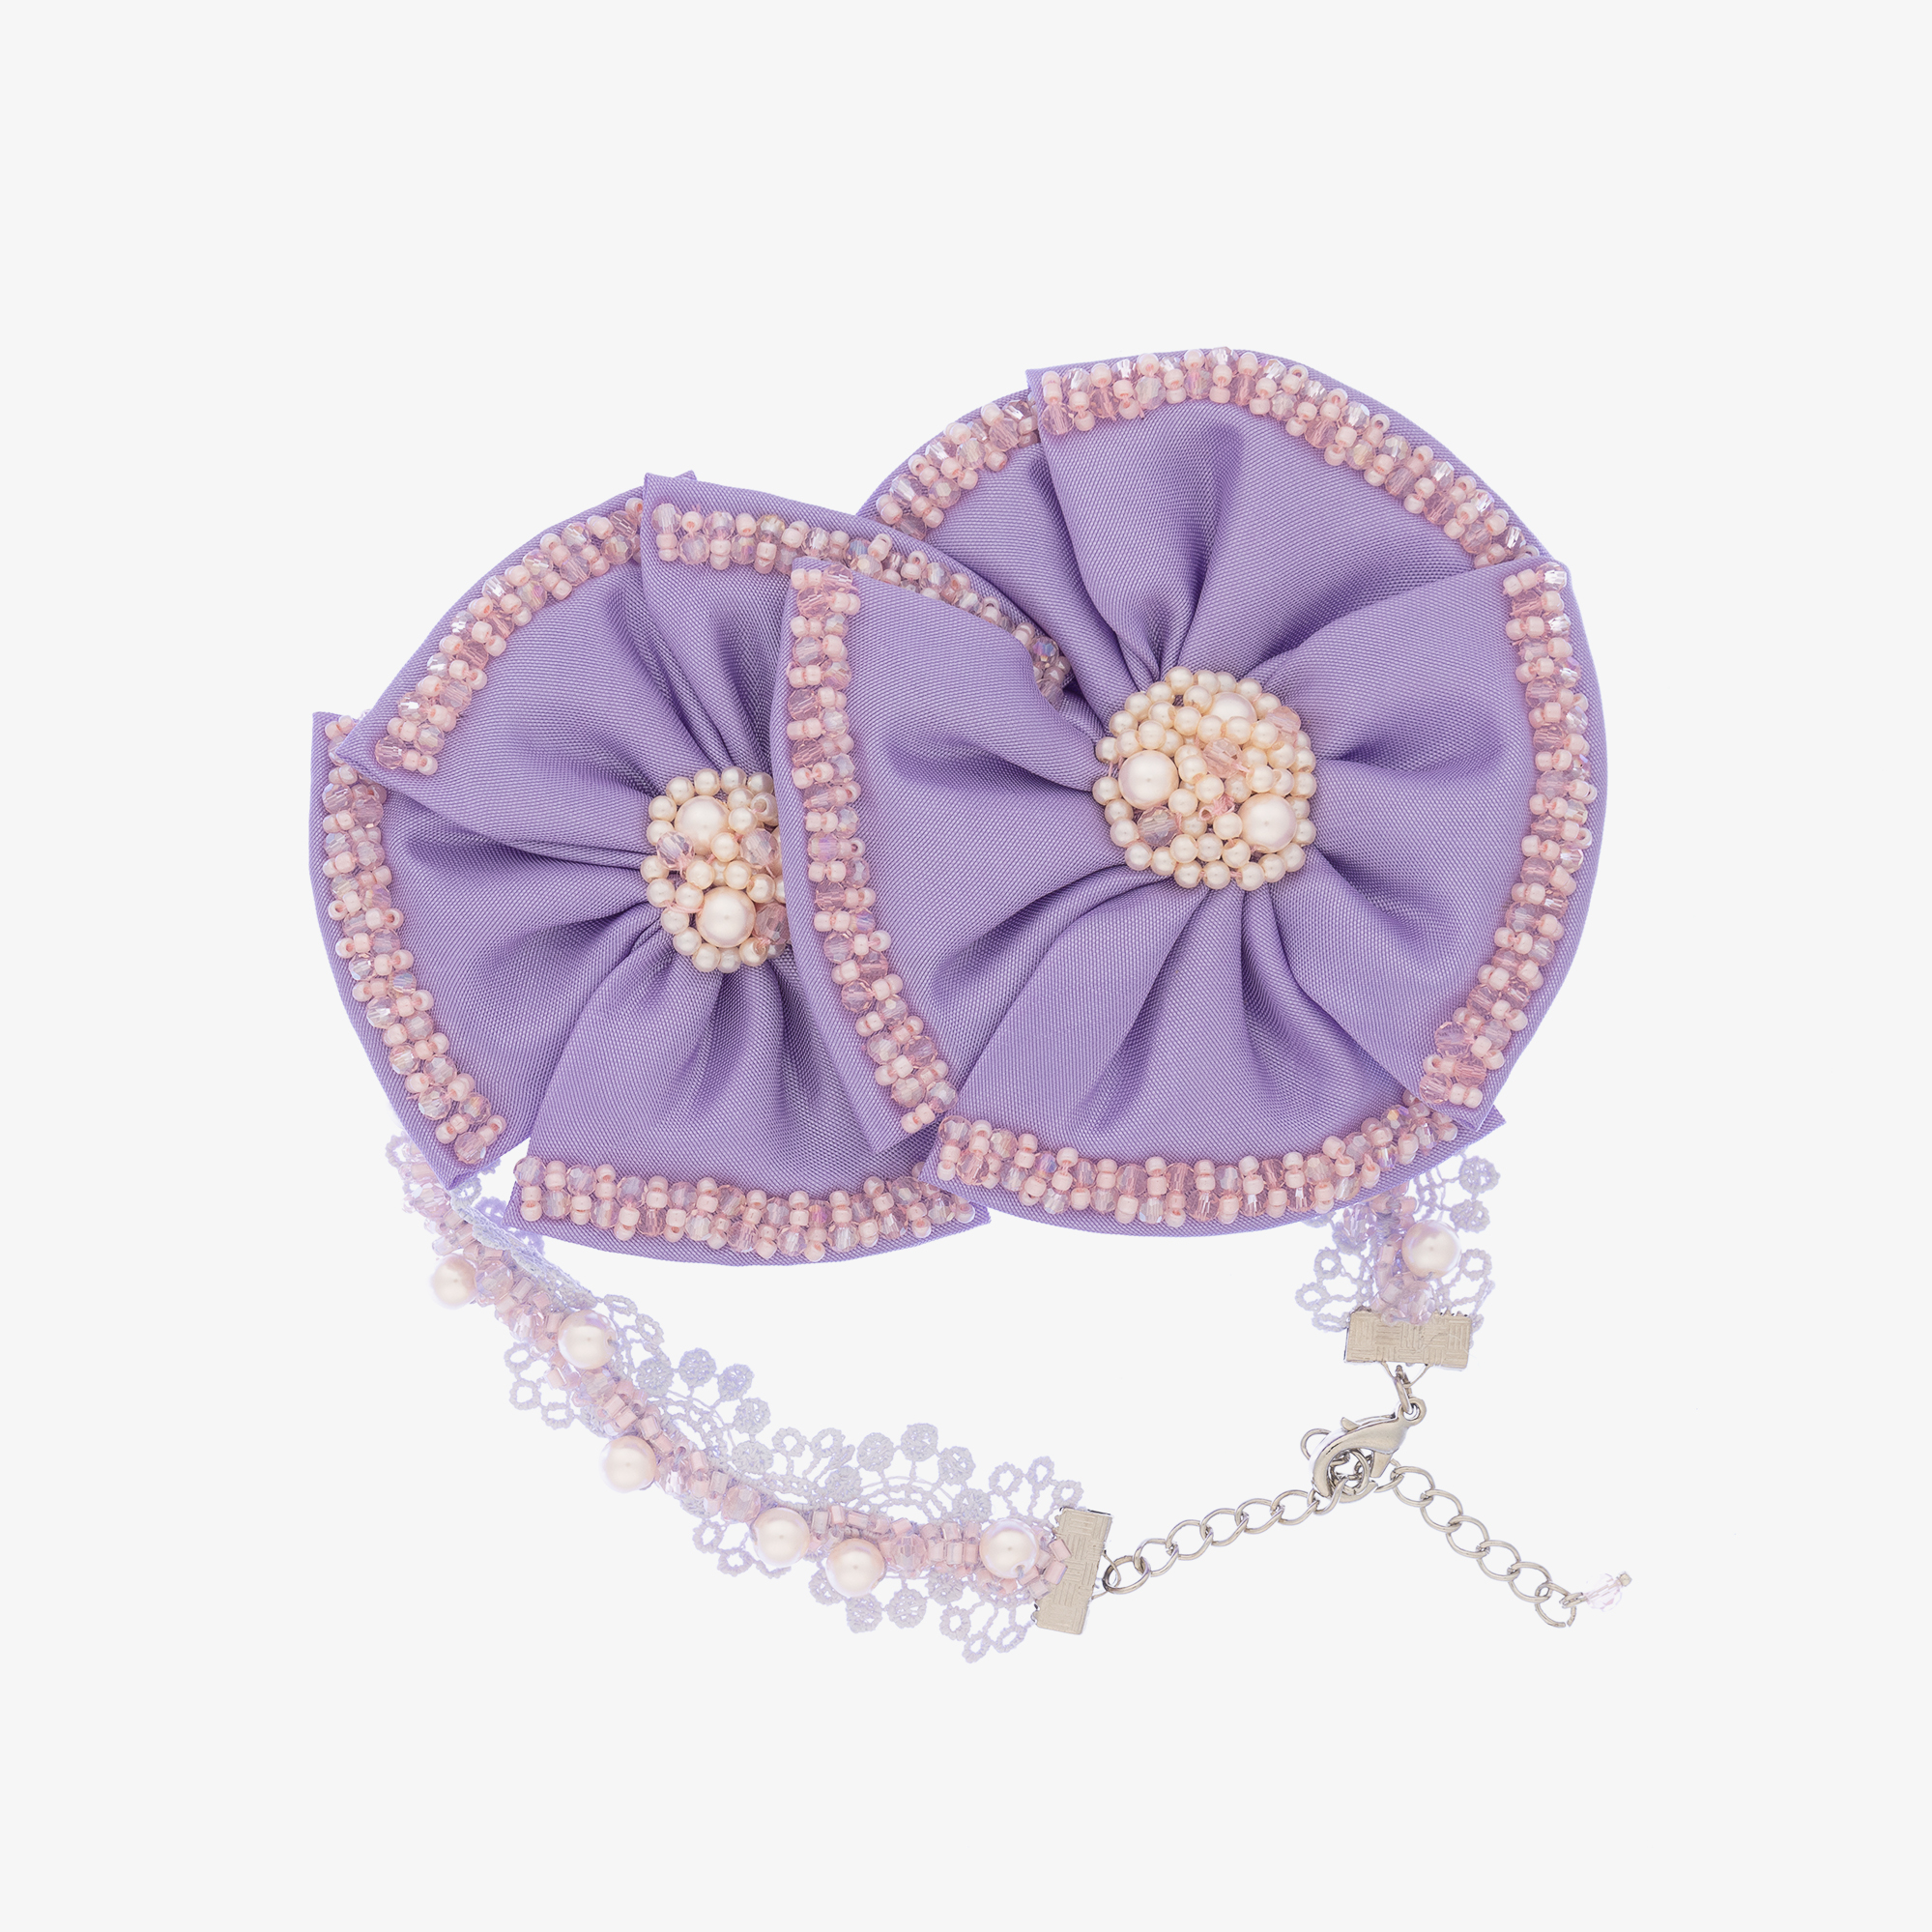 Sienna Likes To Party - Girls Purple Satin, Bead & Lace Necklace